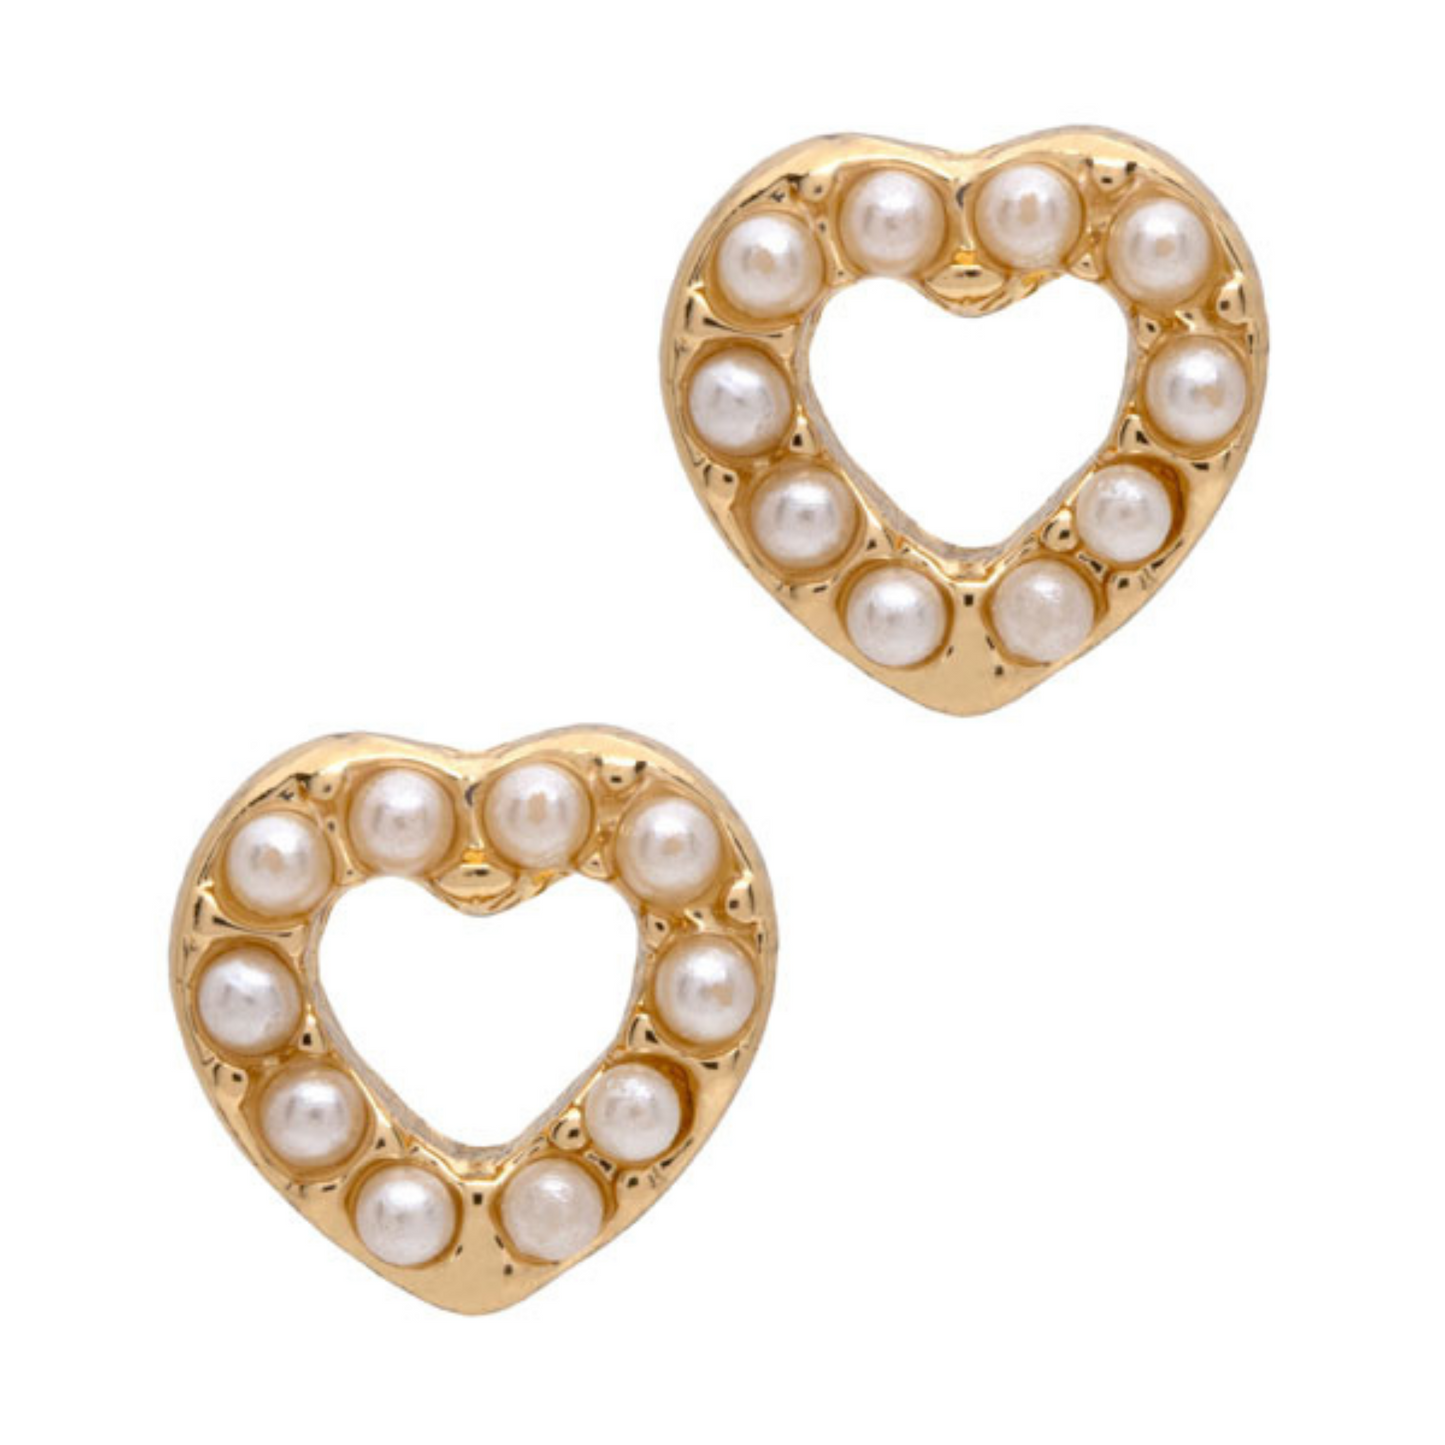 small gold heart shaped stud earrings with pearl accents